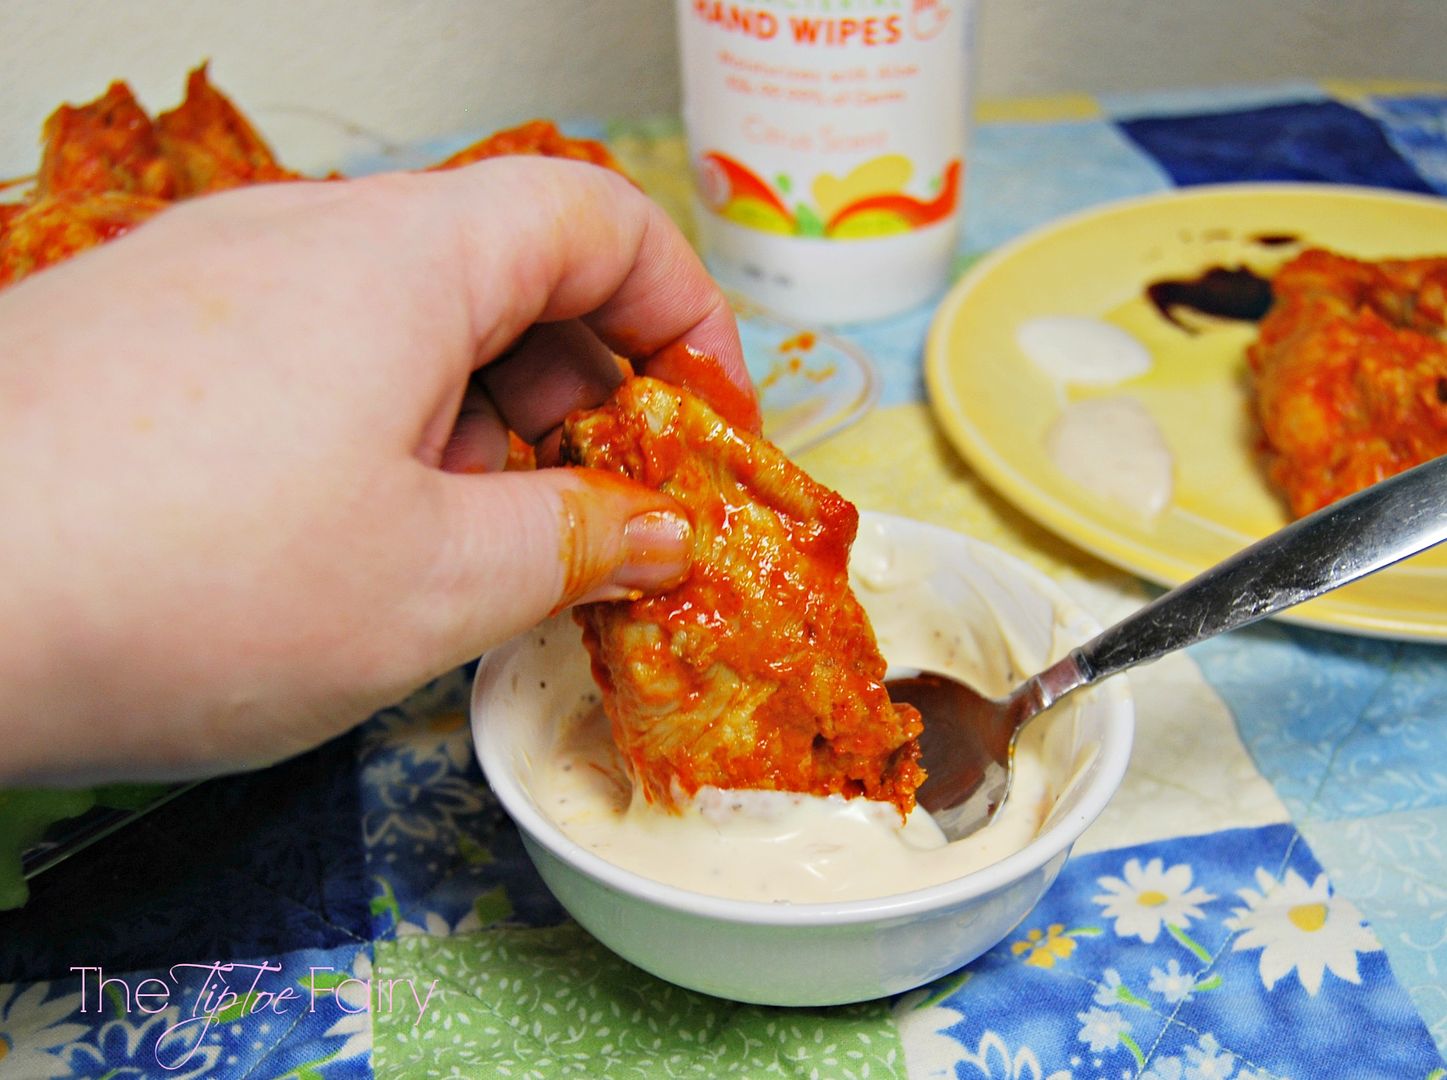 Any'Tizers Wings & Homemade Dipping Sauces | #wingsandwipes #pmedia #ad